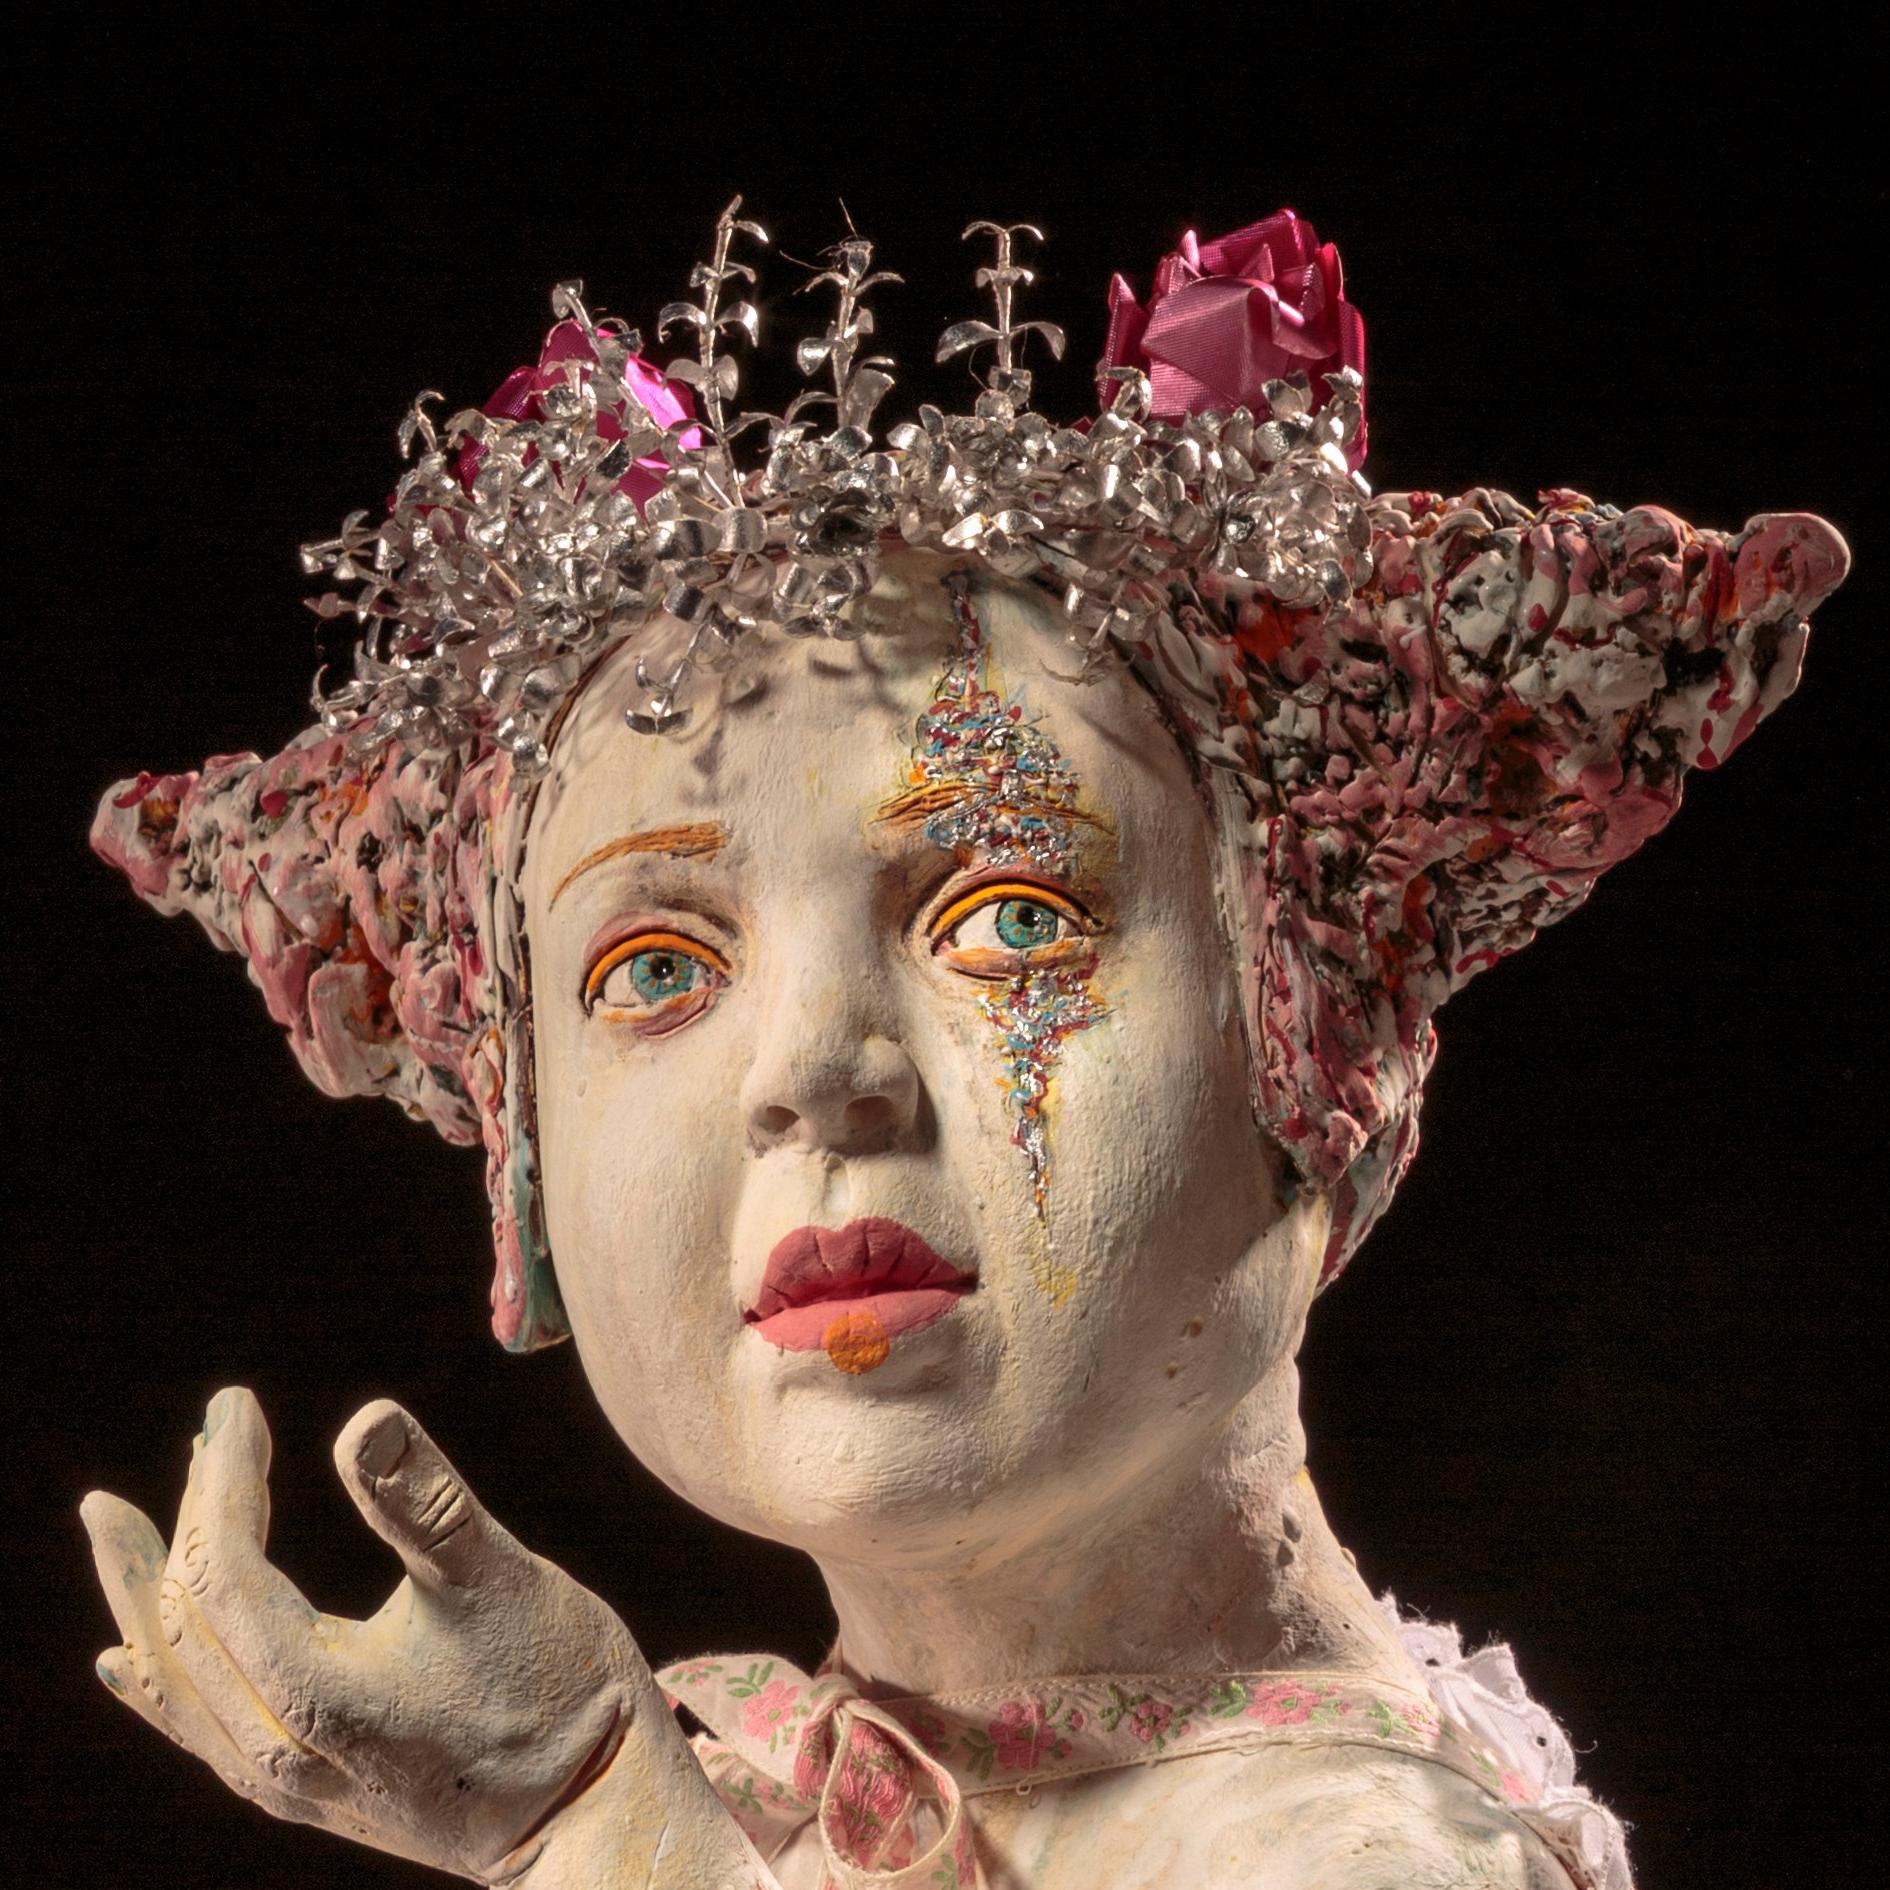 SHE DREAMS - Sculpture by Kirsten Stingle